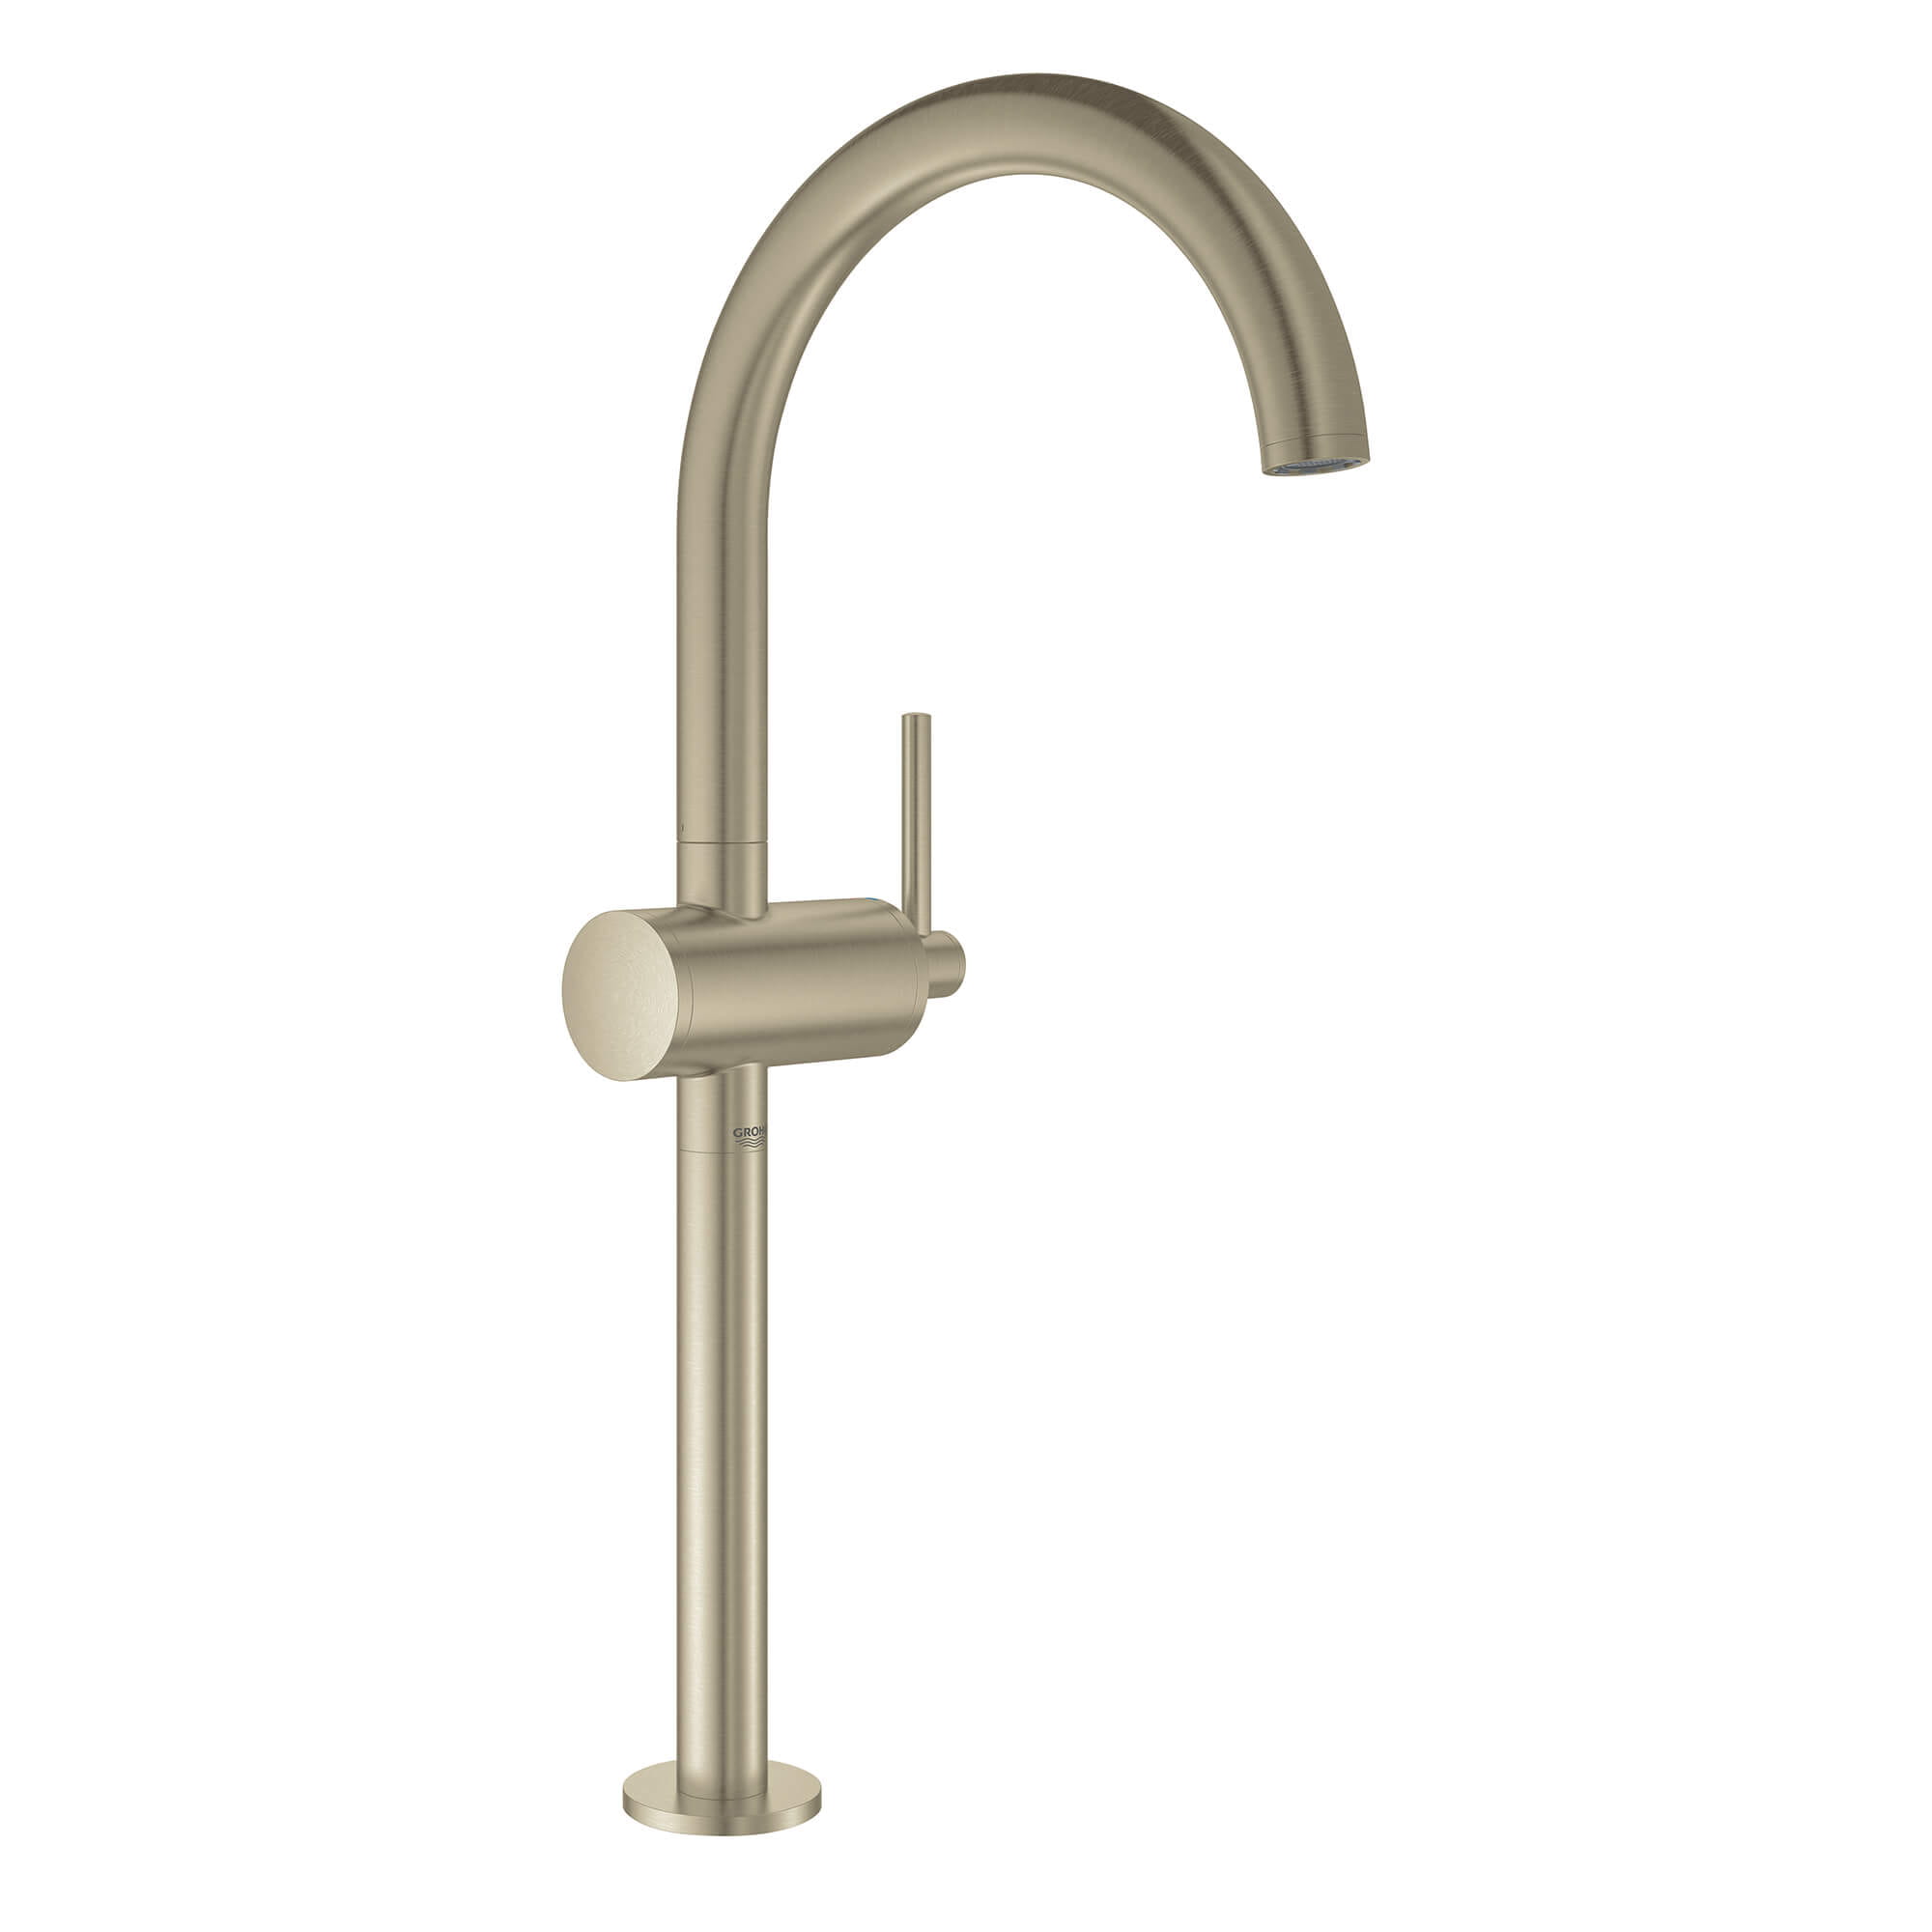 Robinet monotrou taille XL BRUSHED NICKEL